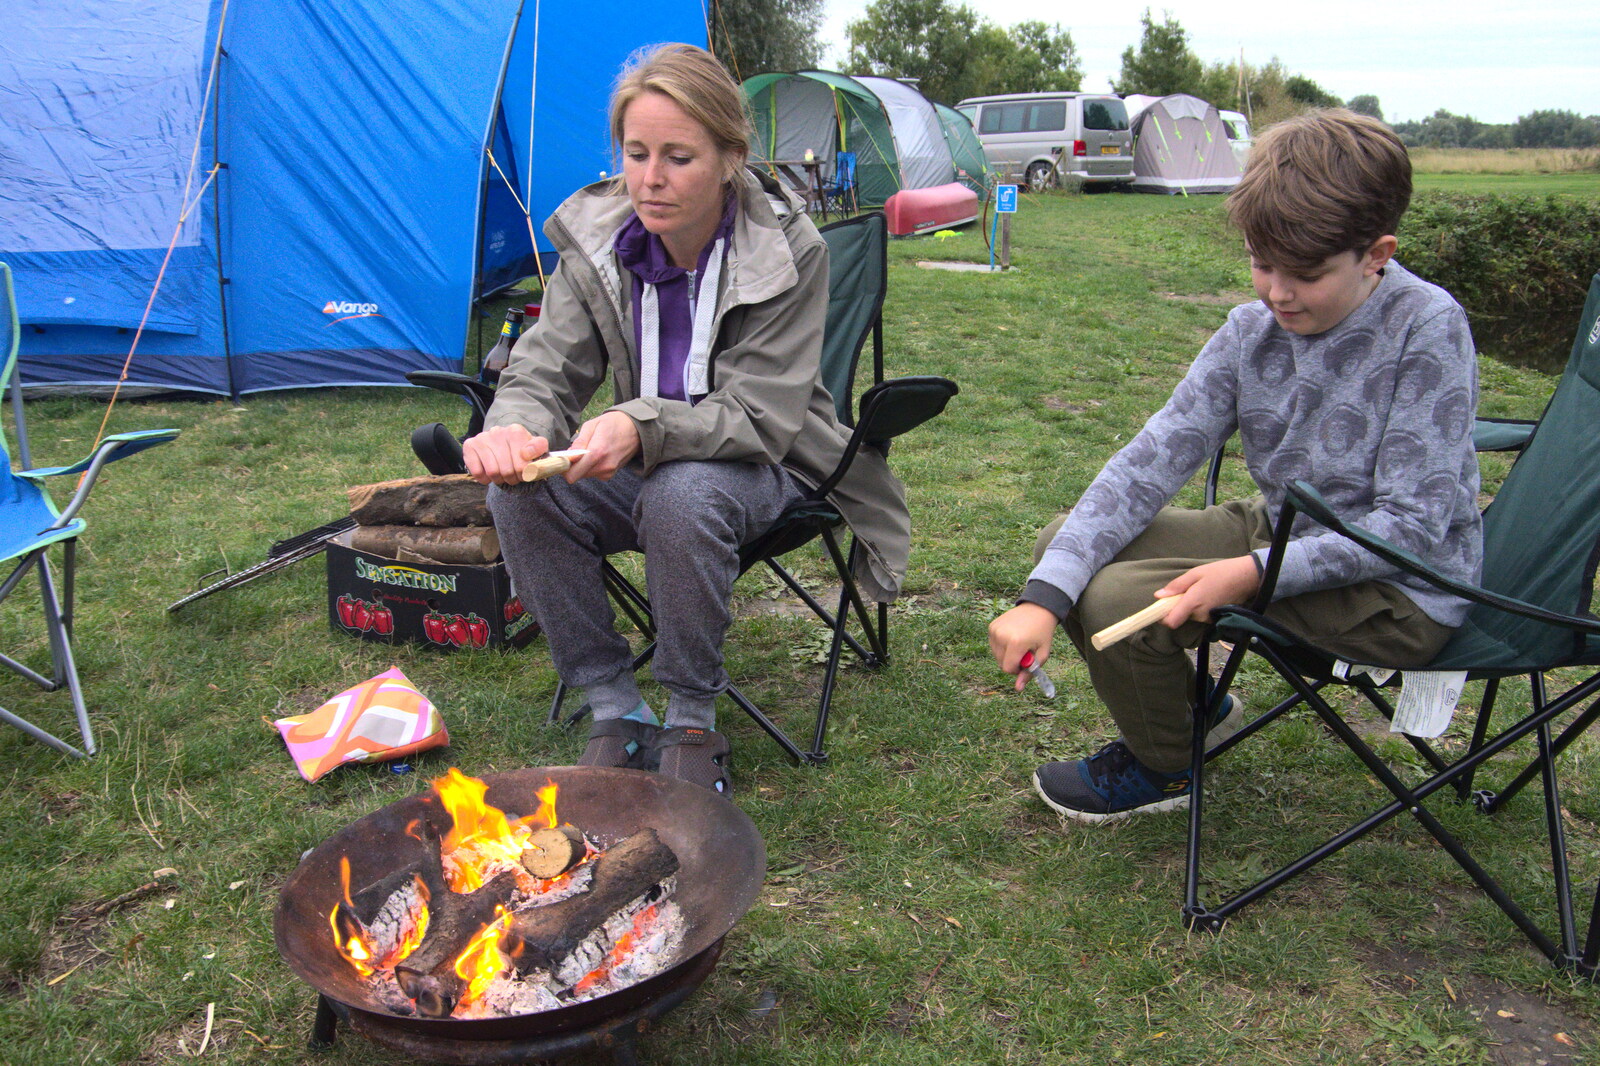 Camping at Three Rivers, Geldeston, Norfolk - 5th September 2020: Allyson and Fred do some whittling